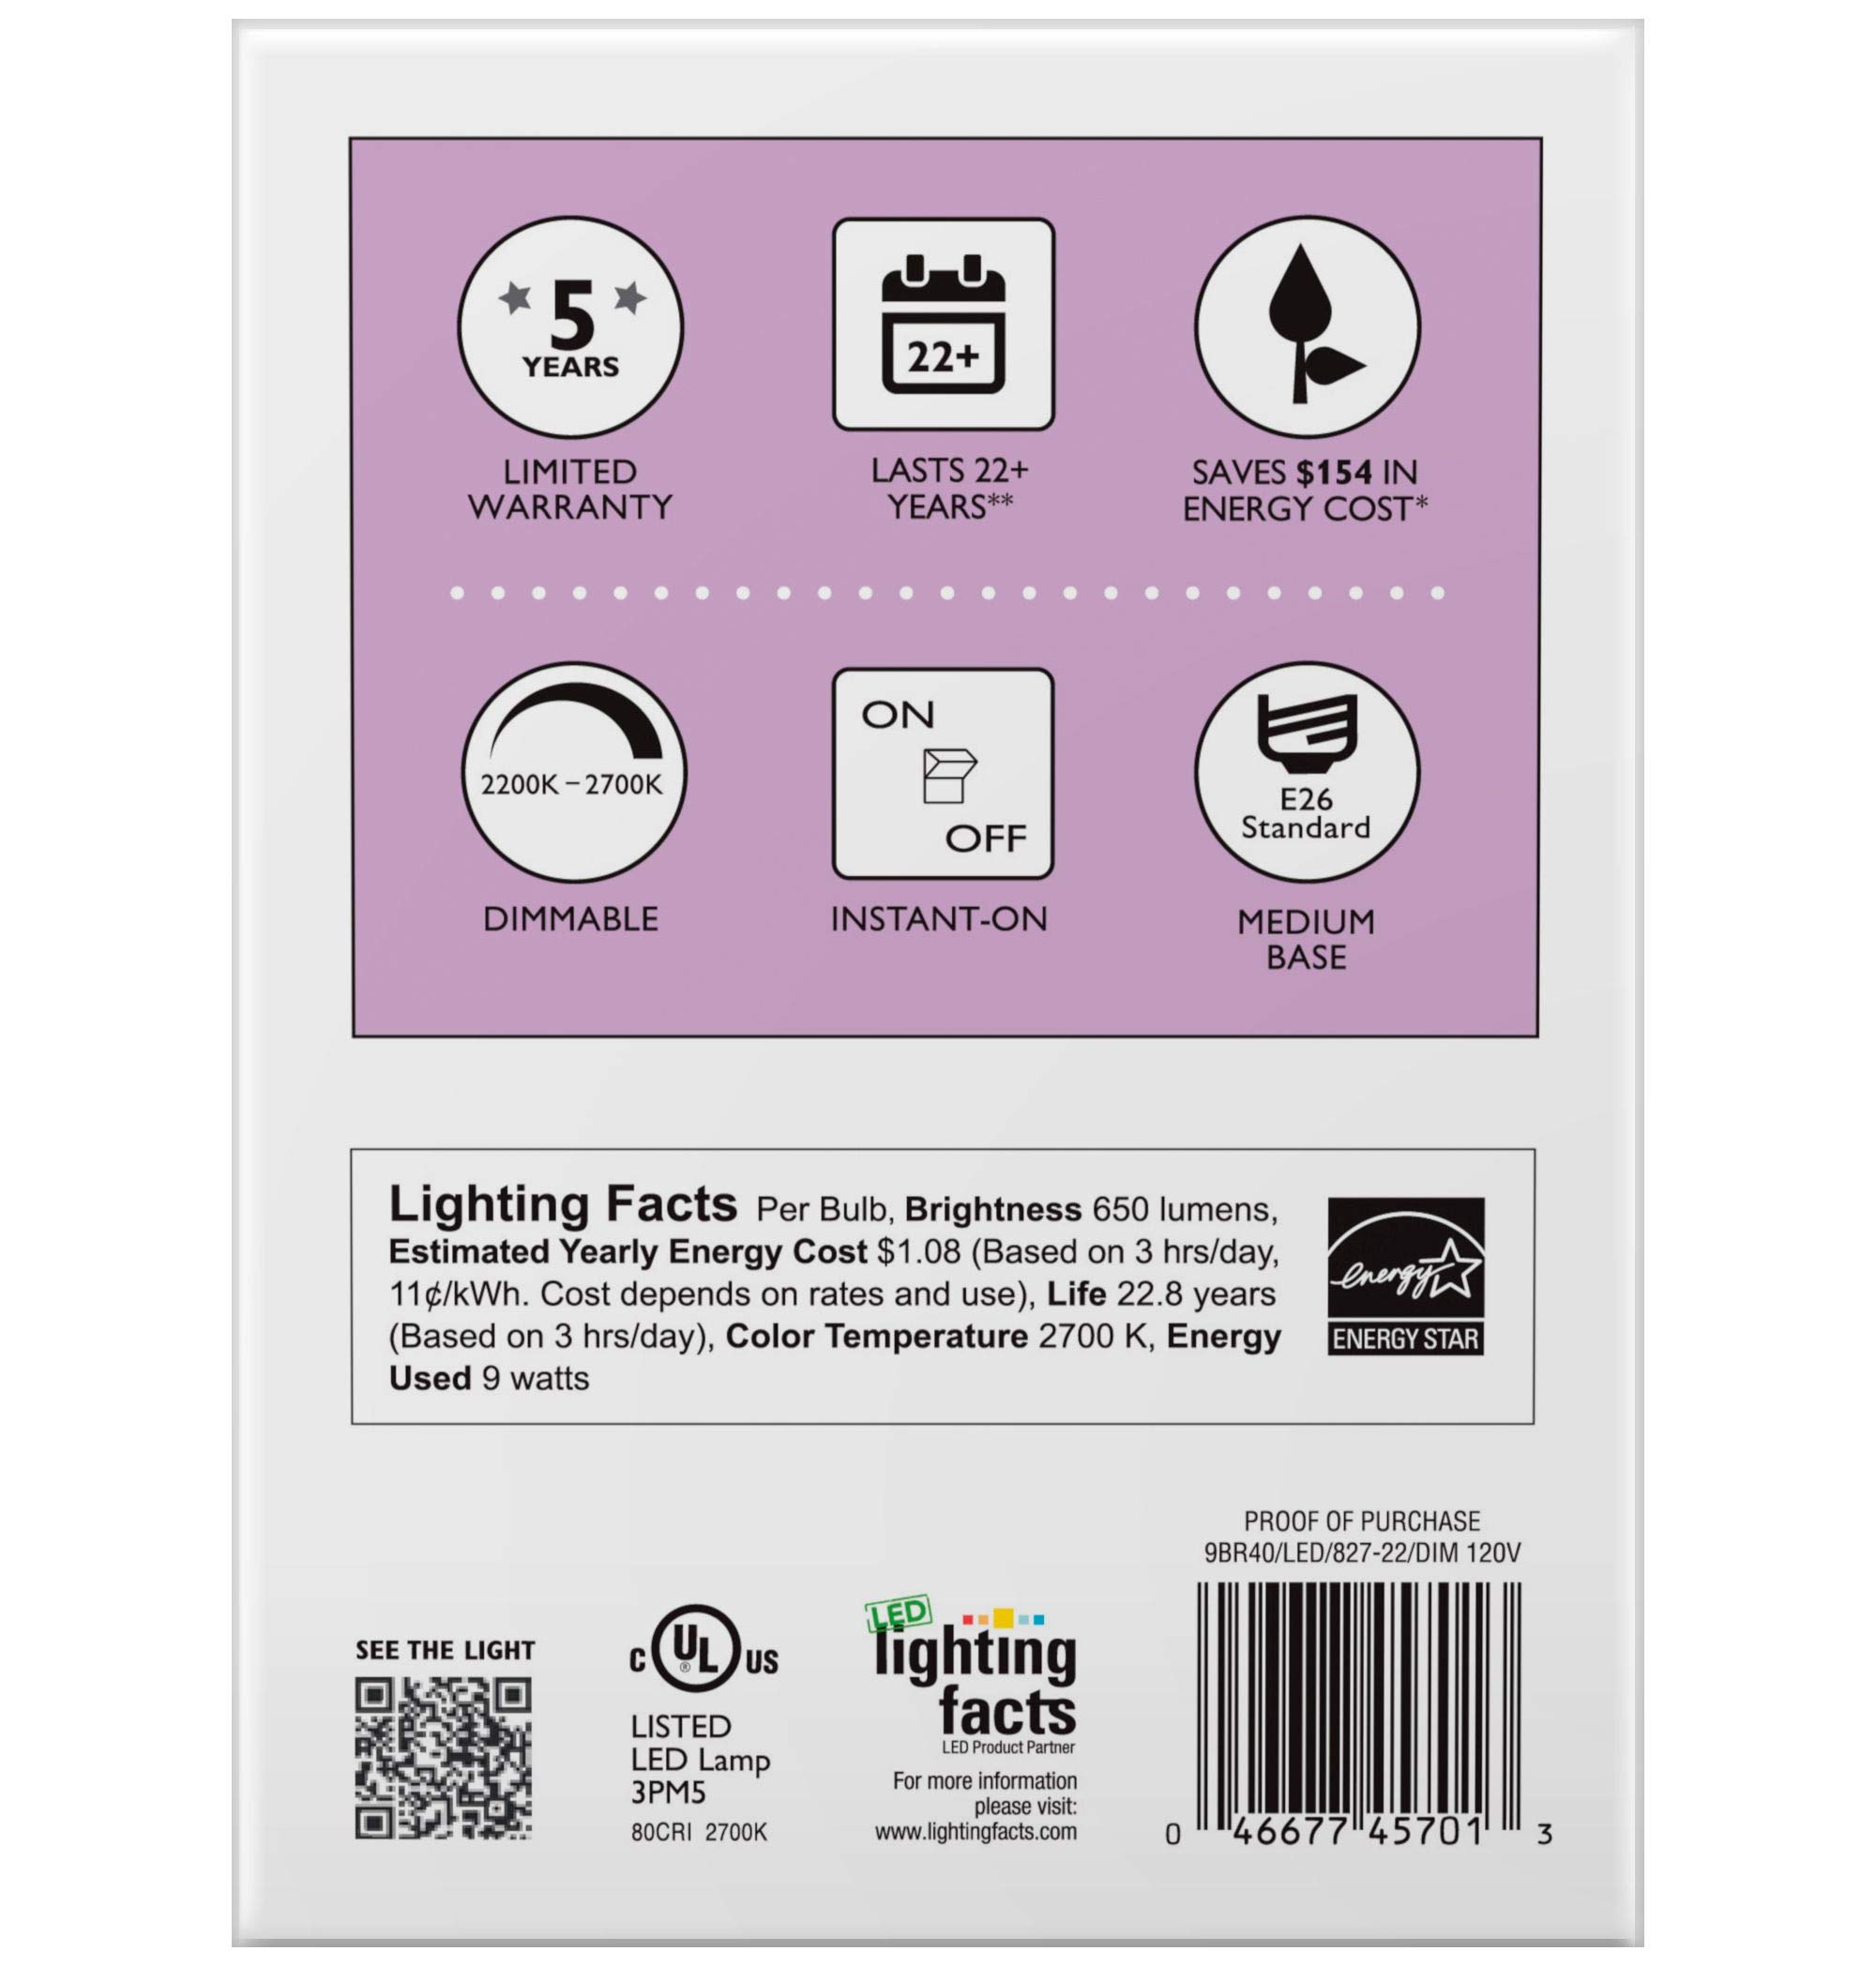 PHILIPS LED 457010 9w BR40 LED Dimmable Flood Soft White Bulb-65w equiv, 1 Count (Pack of 2)